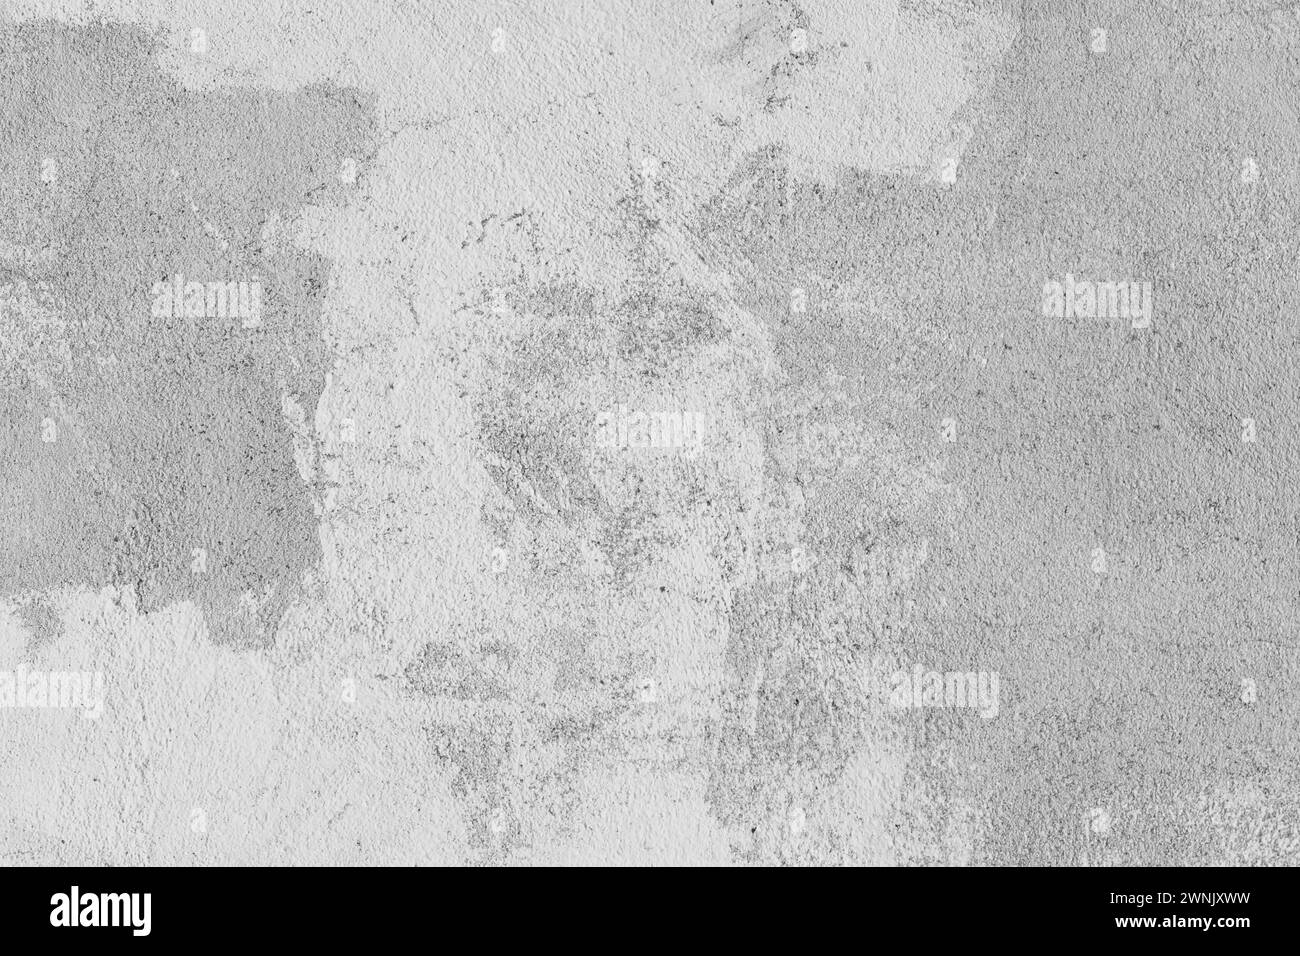 Old stucco plaster surface, concrete wall background, close up grunge texture of gray painted cement texture. Wallpaper, backdrop, architecture design Stock Photo